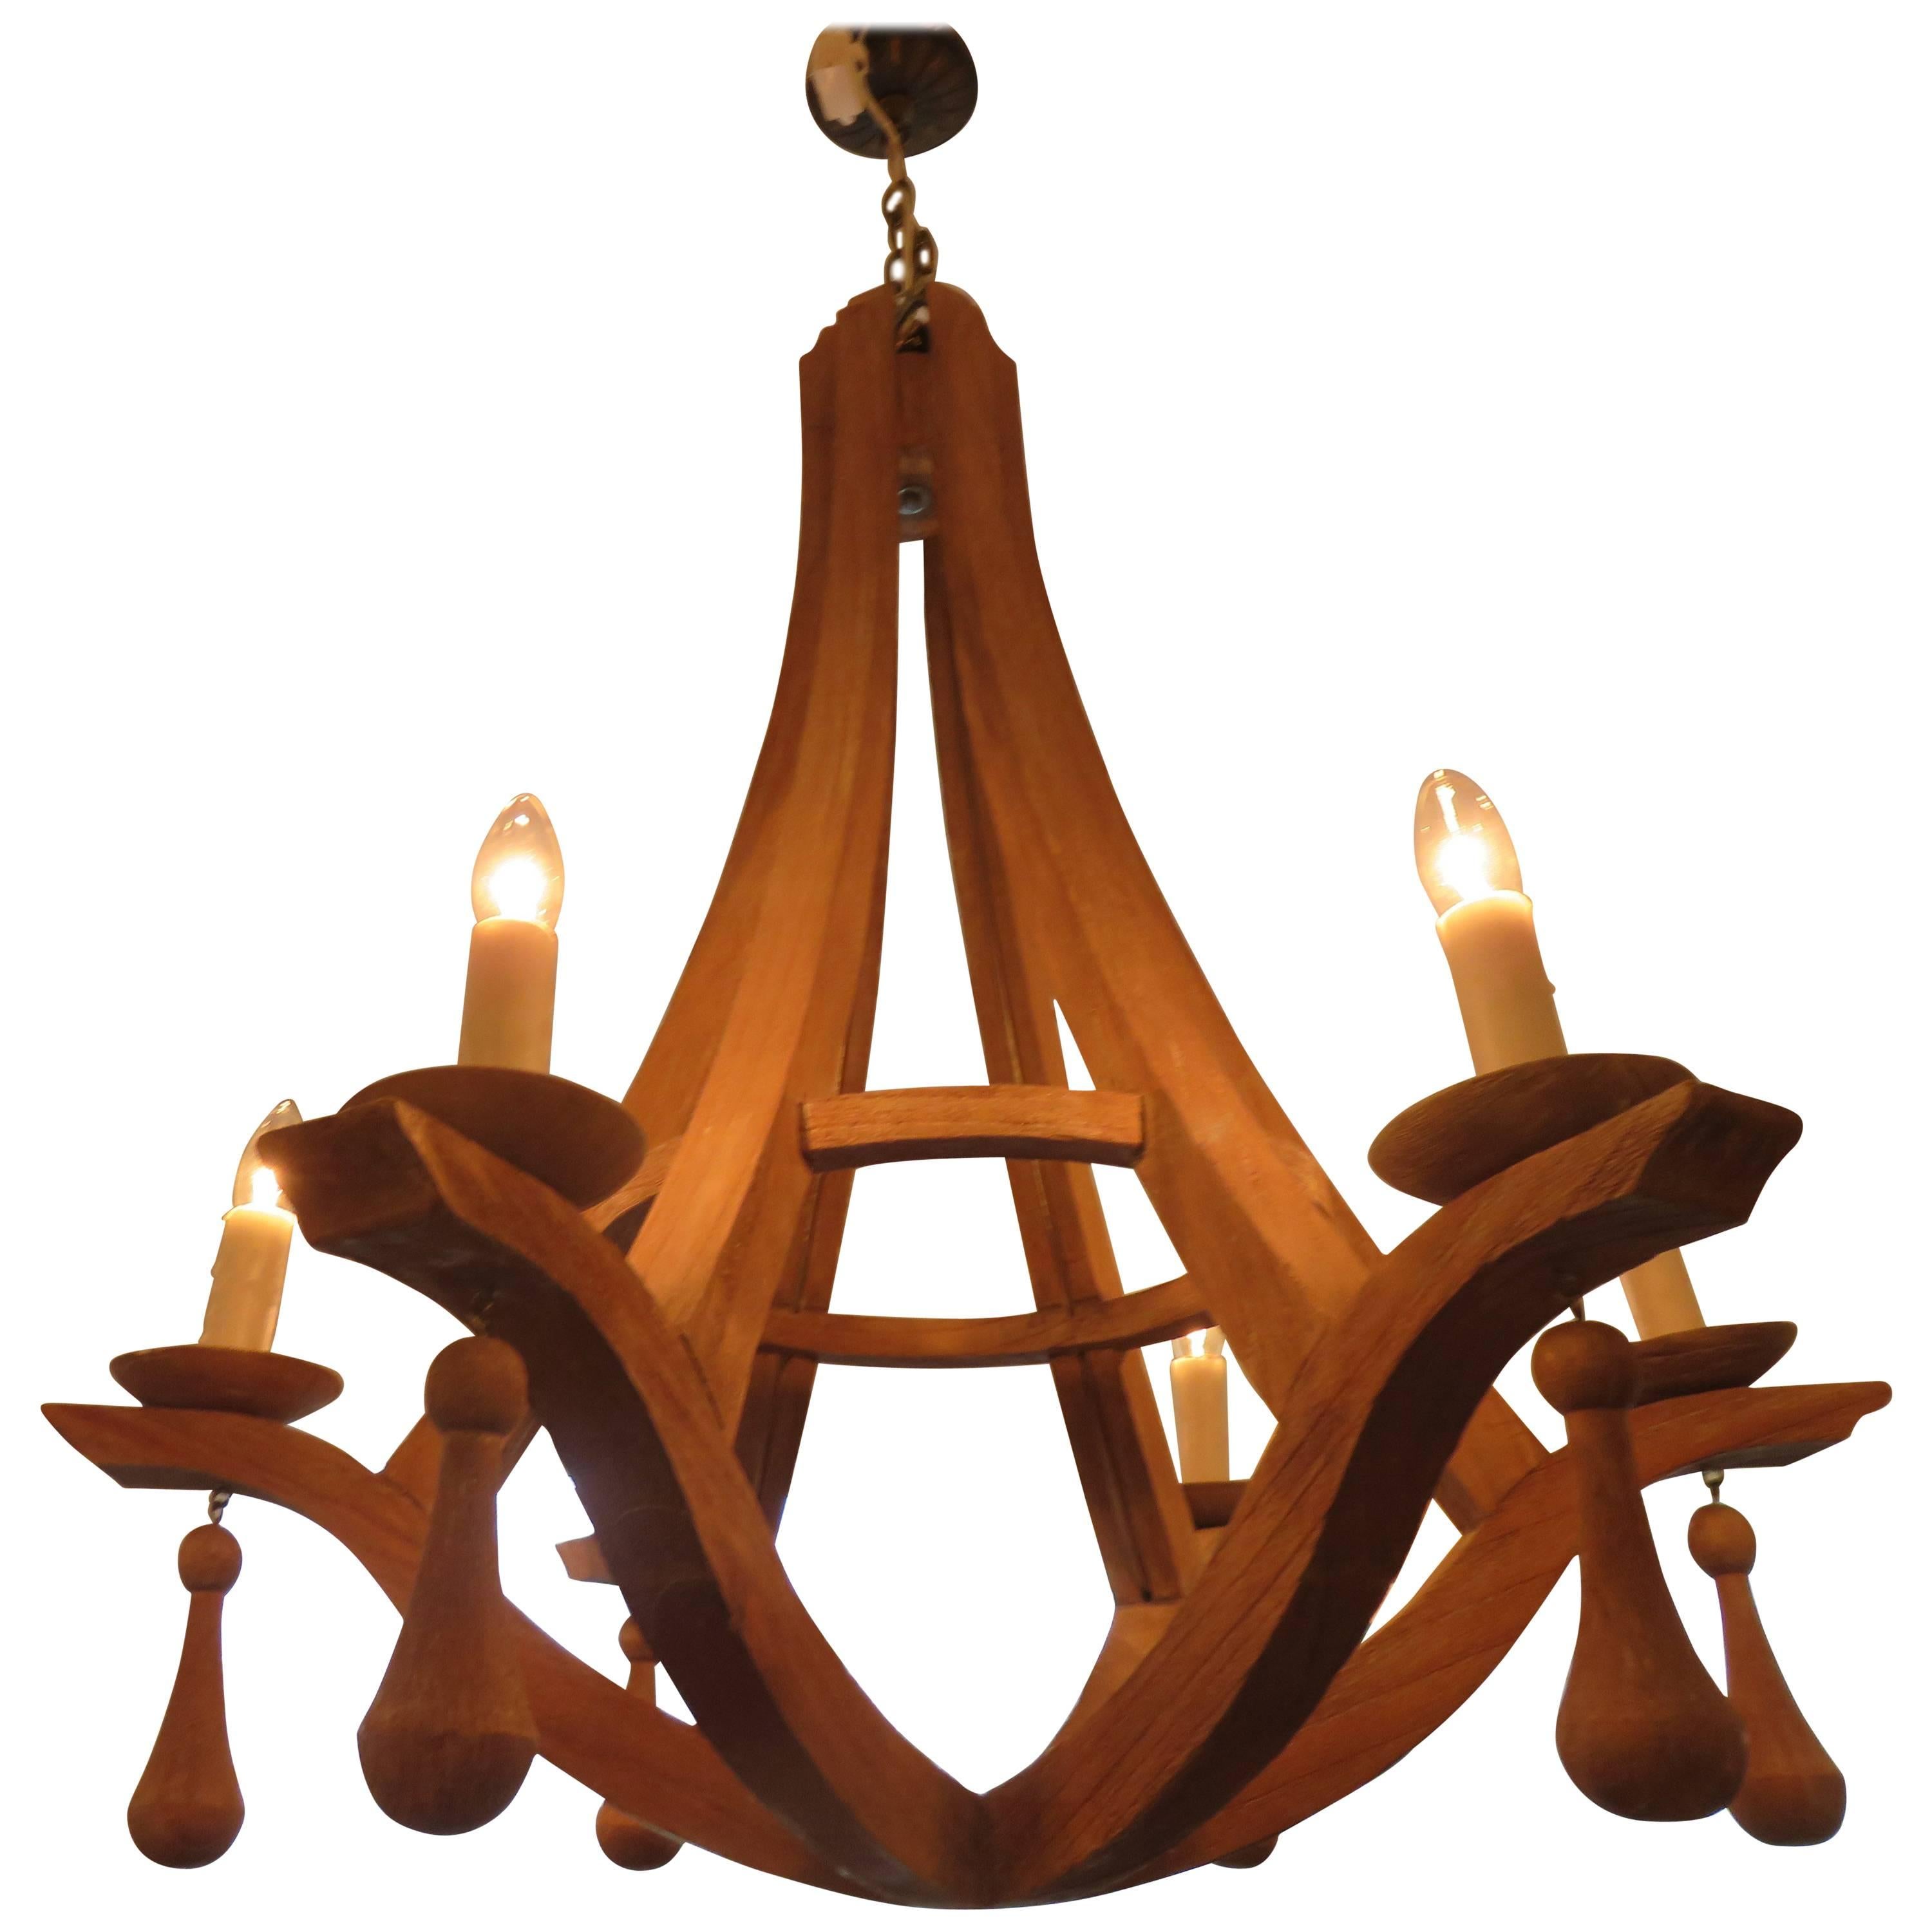 Six-Light Gothic Form Reclaimed Wood Chandelier 